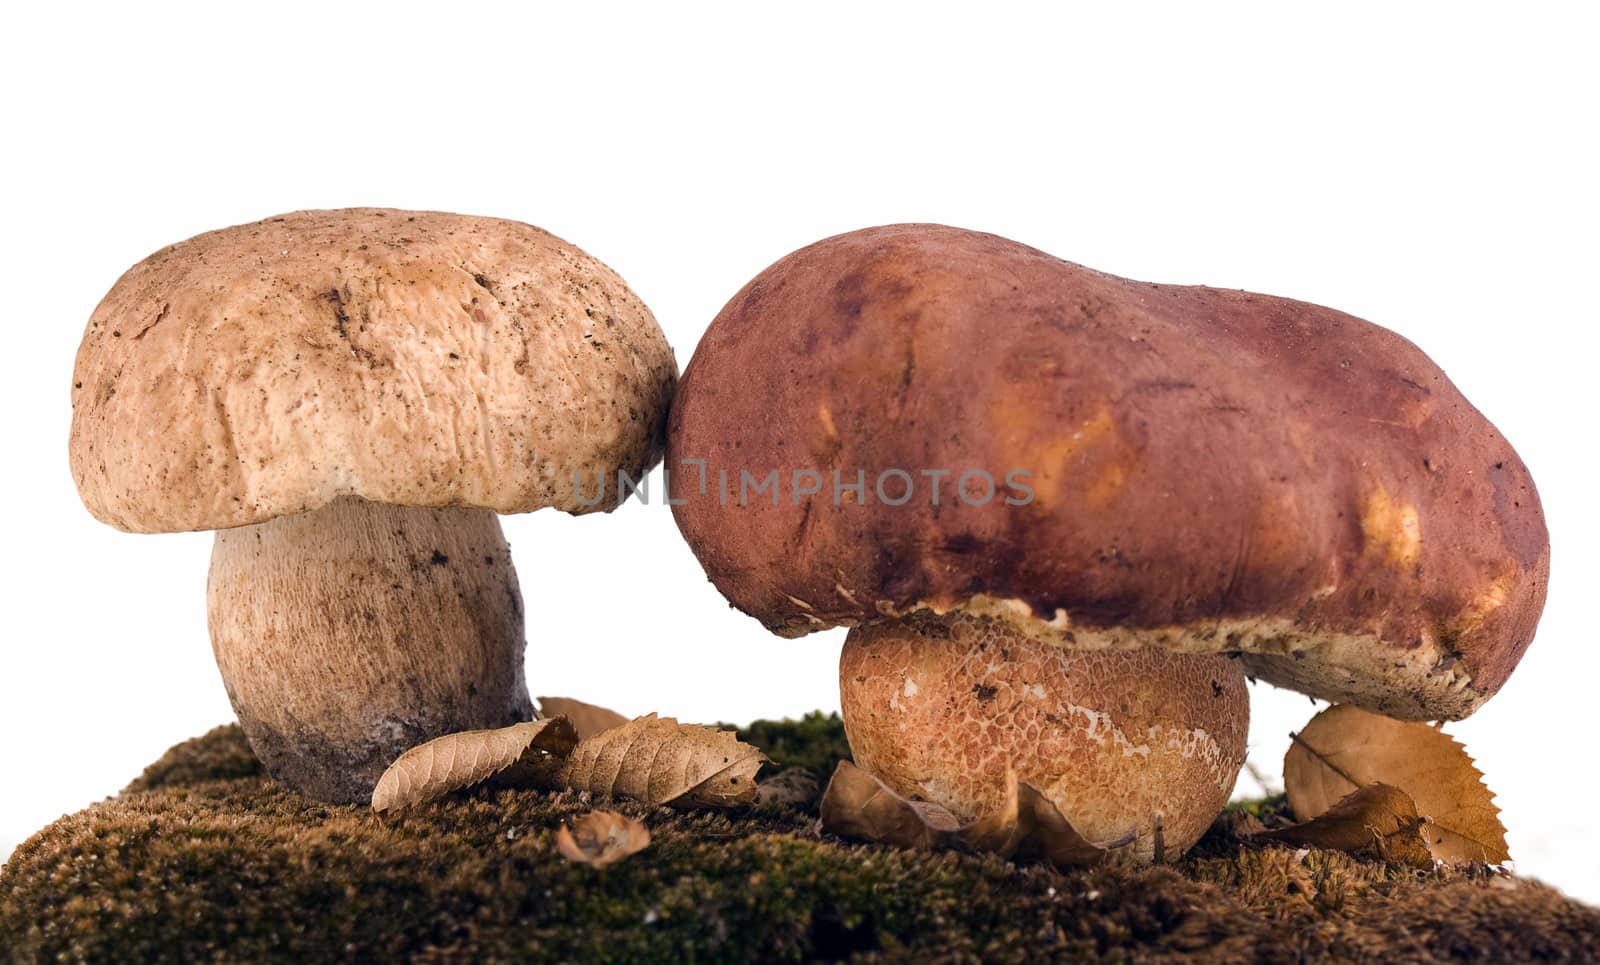 porcini mushrooms isolated on white background by sette